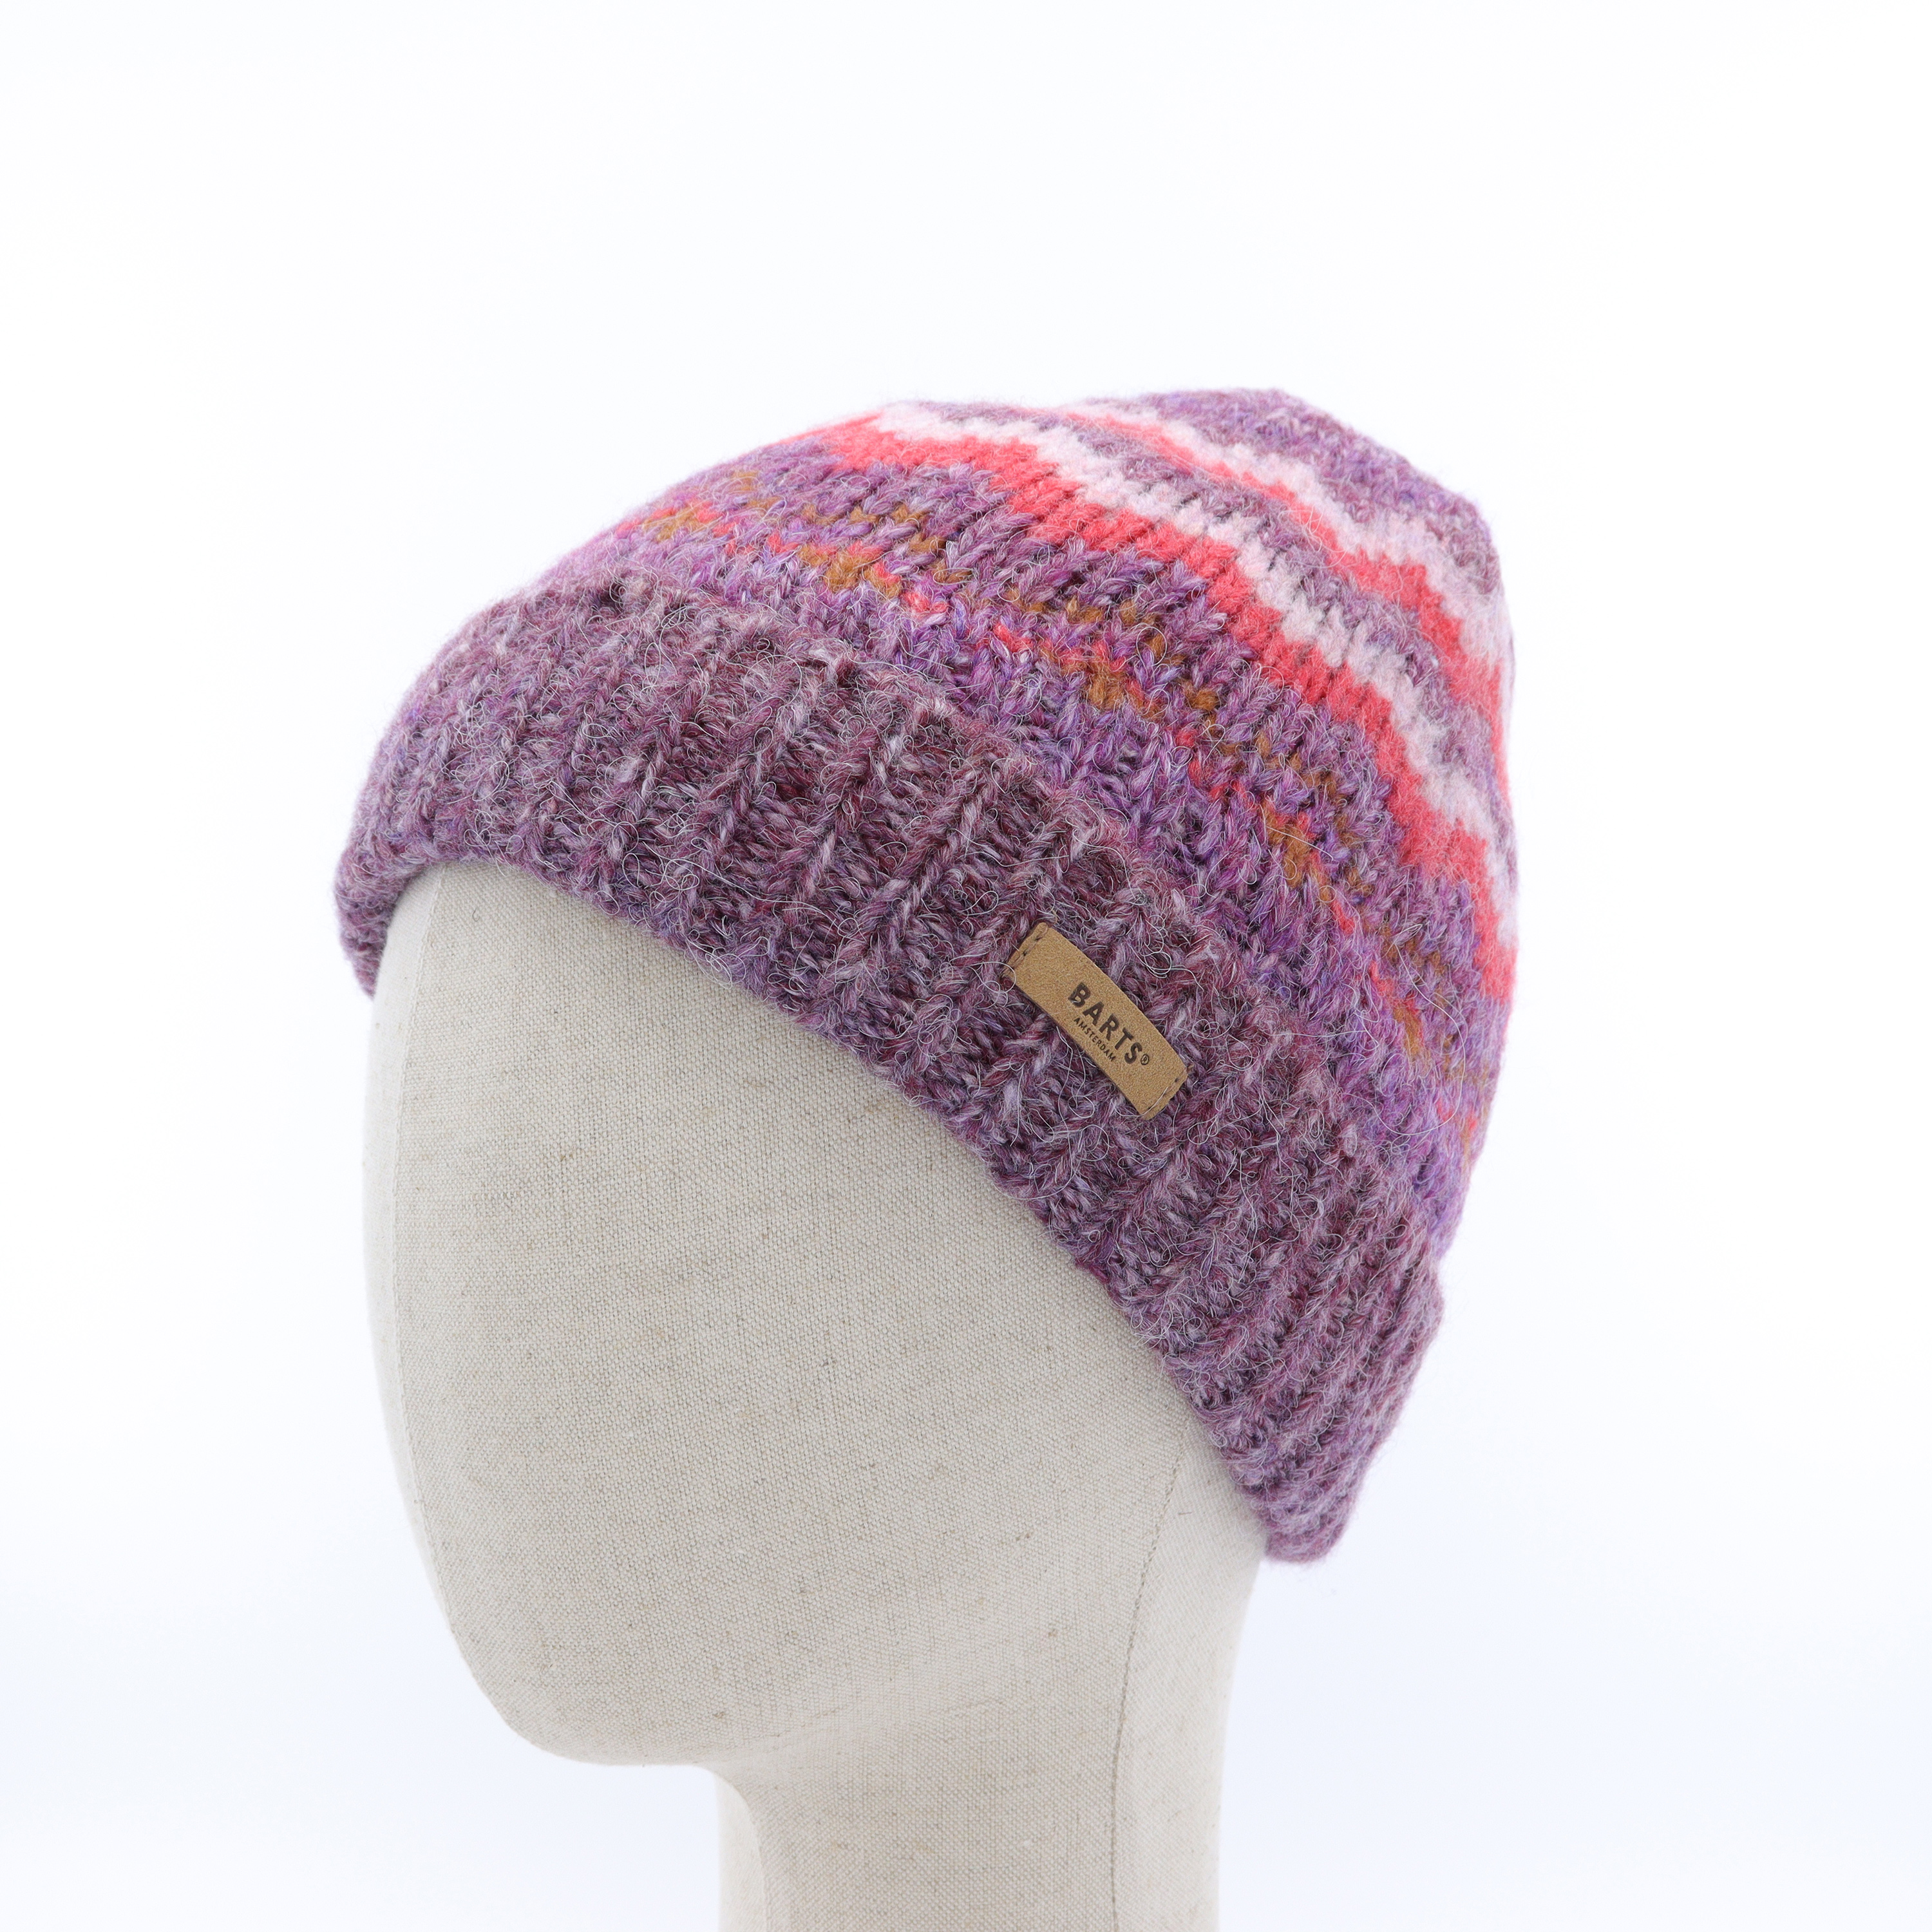 Pink Beanies | UK Stock, Shipped from Cornwall - BeanieShop